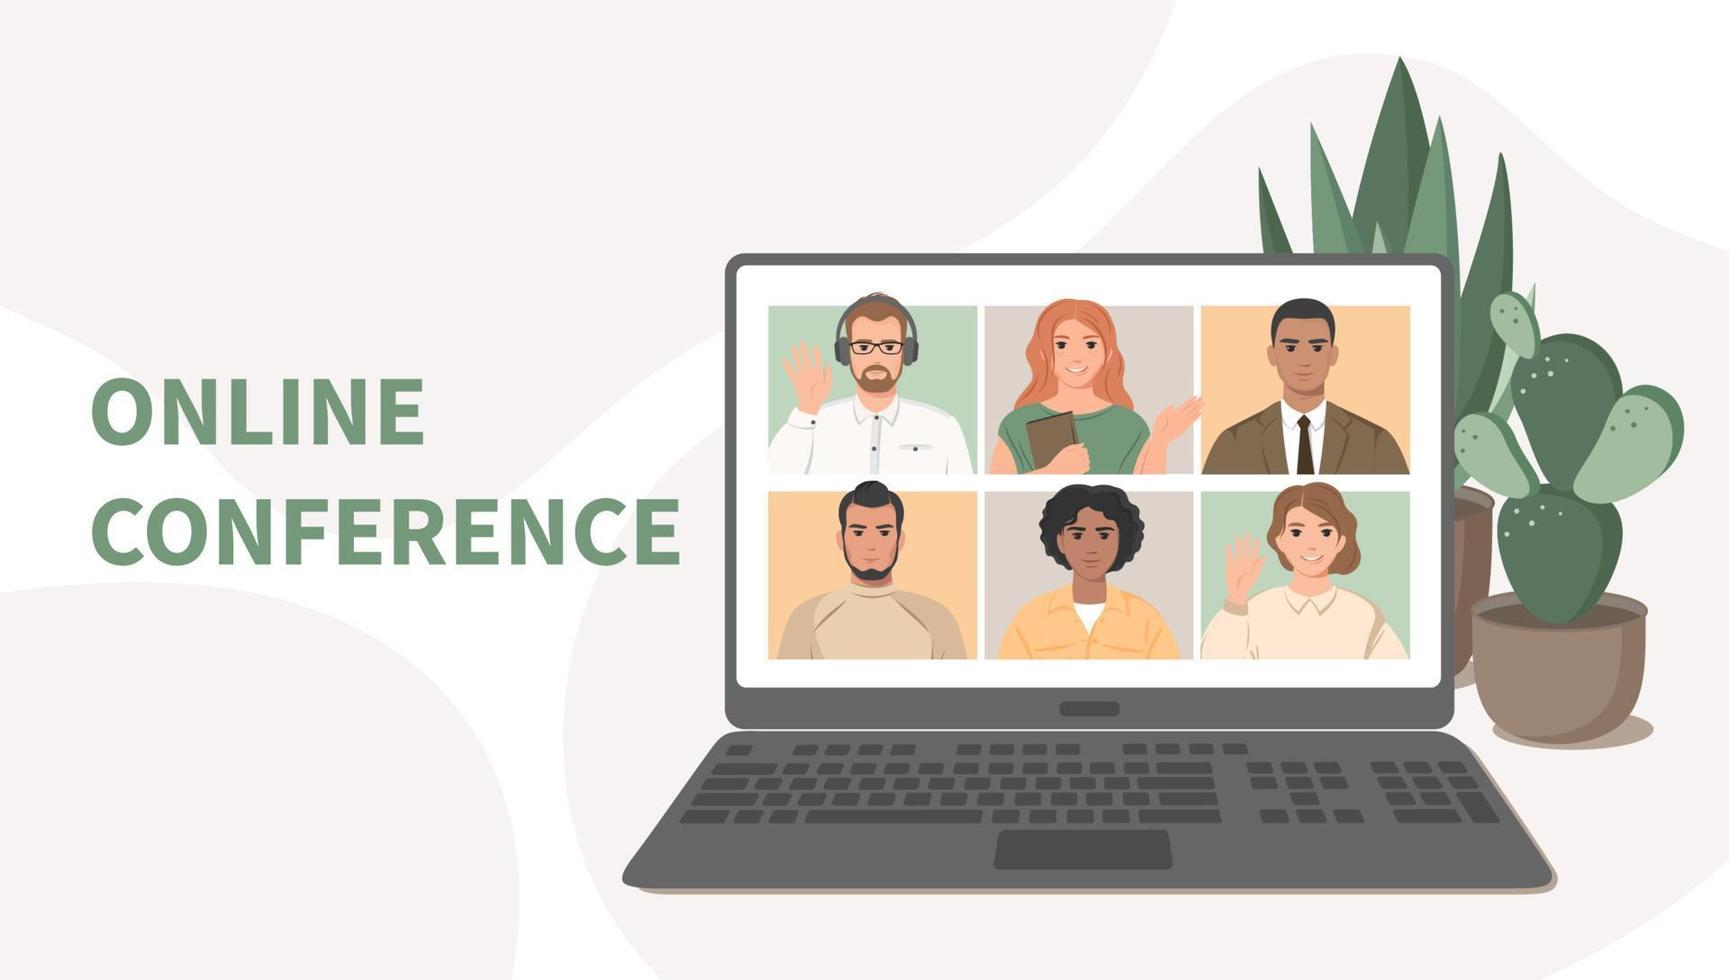 Online meeting via video conference. Group of different people talking by internet, web chatting. Online training, work from home, quarantine concept. Vector illustration in flat style.